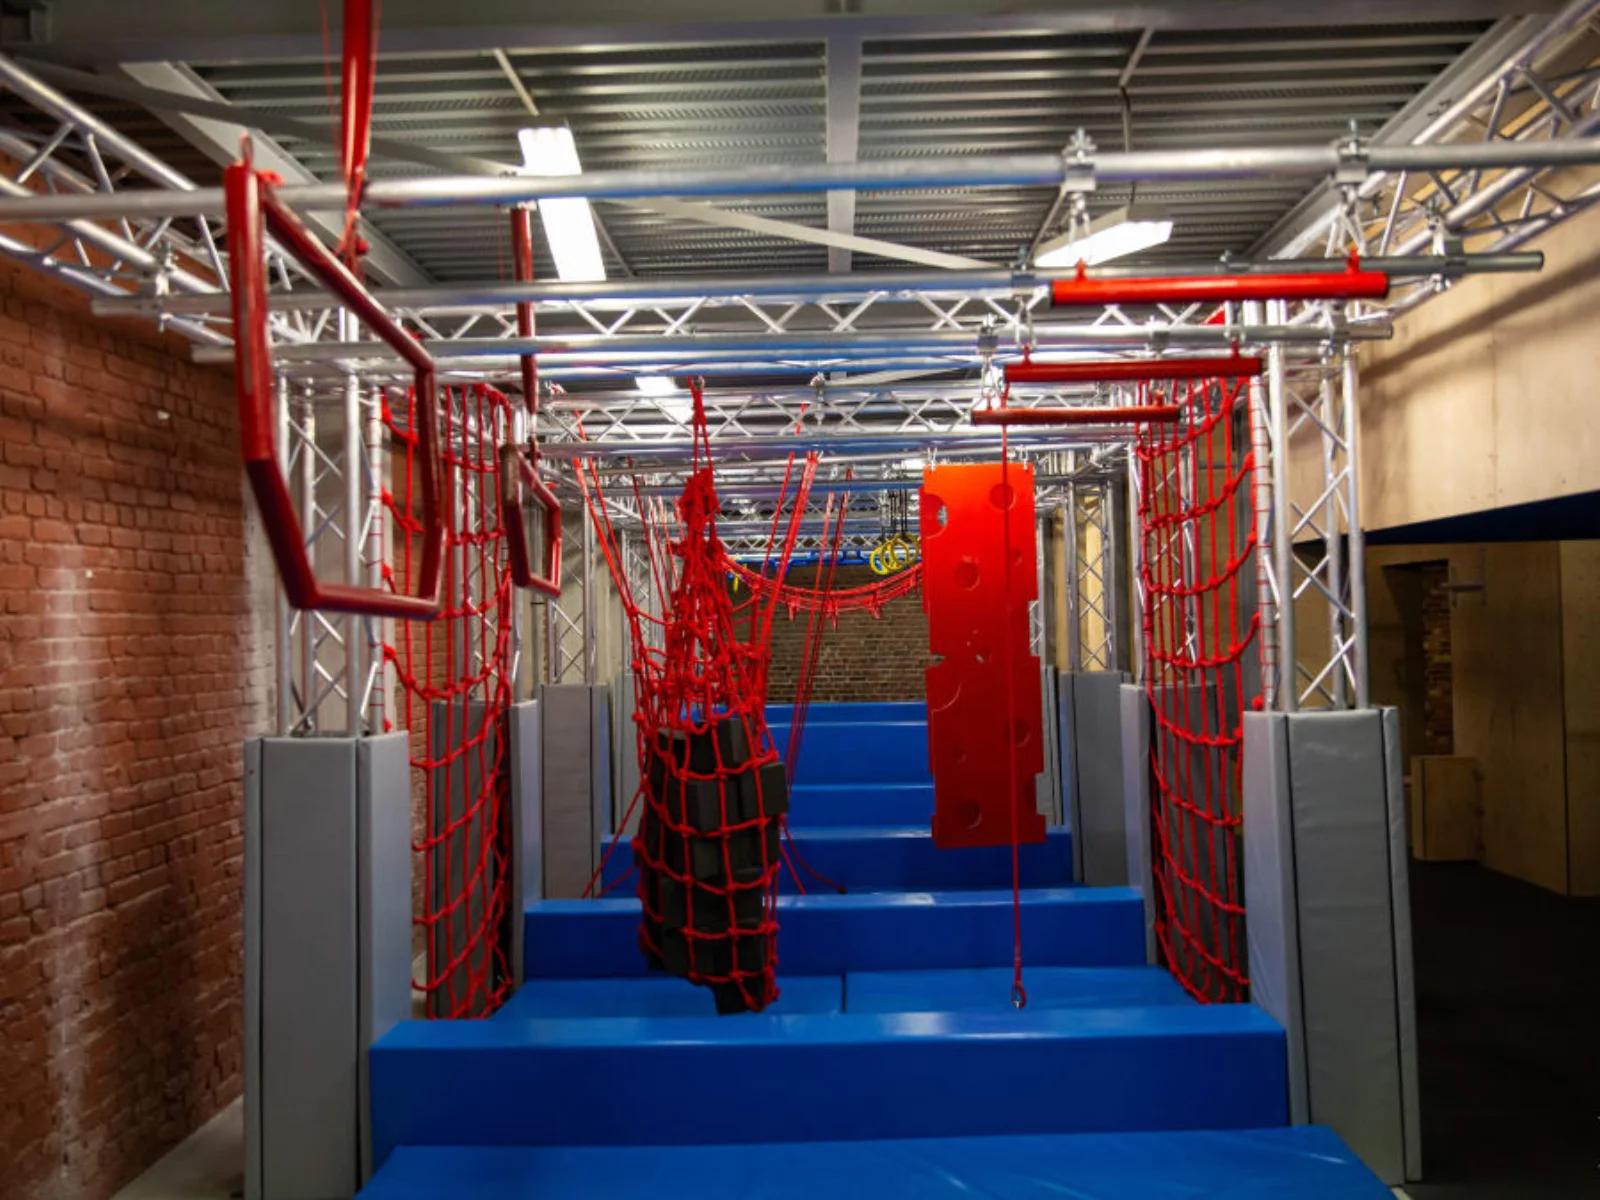 Space First indoor obstacle course - 4